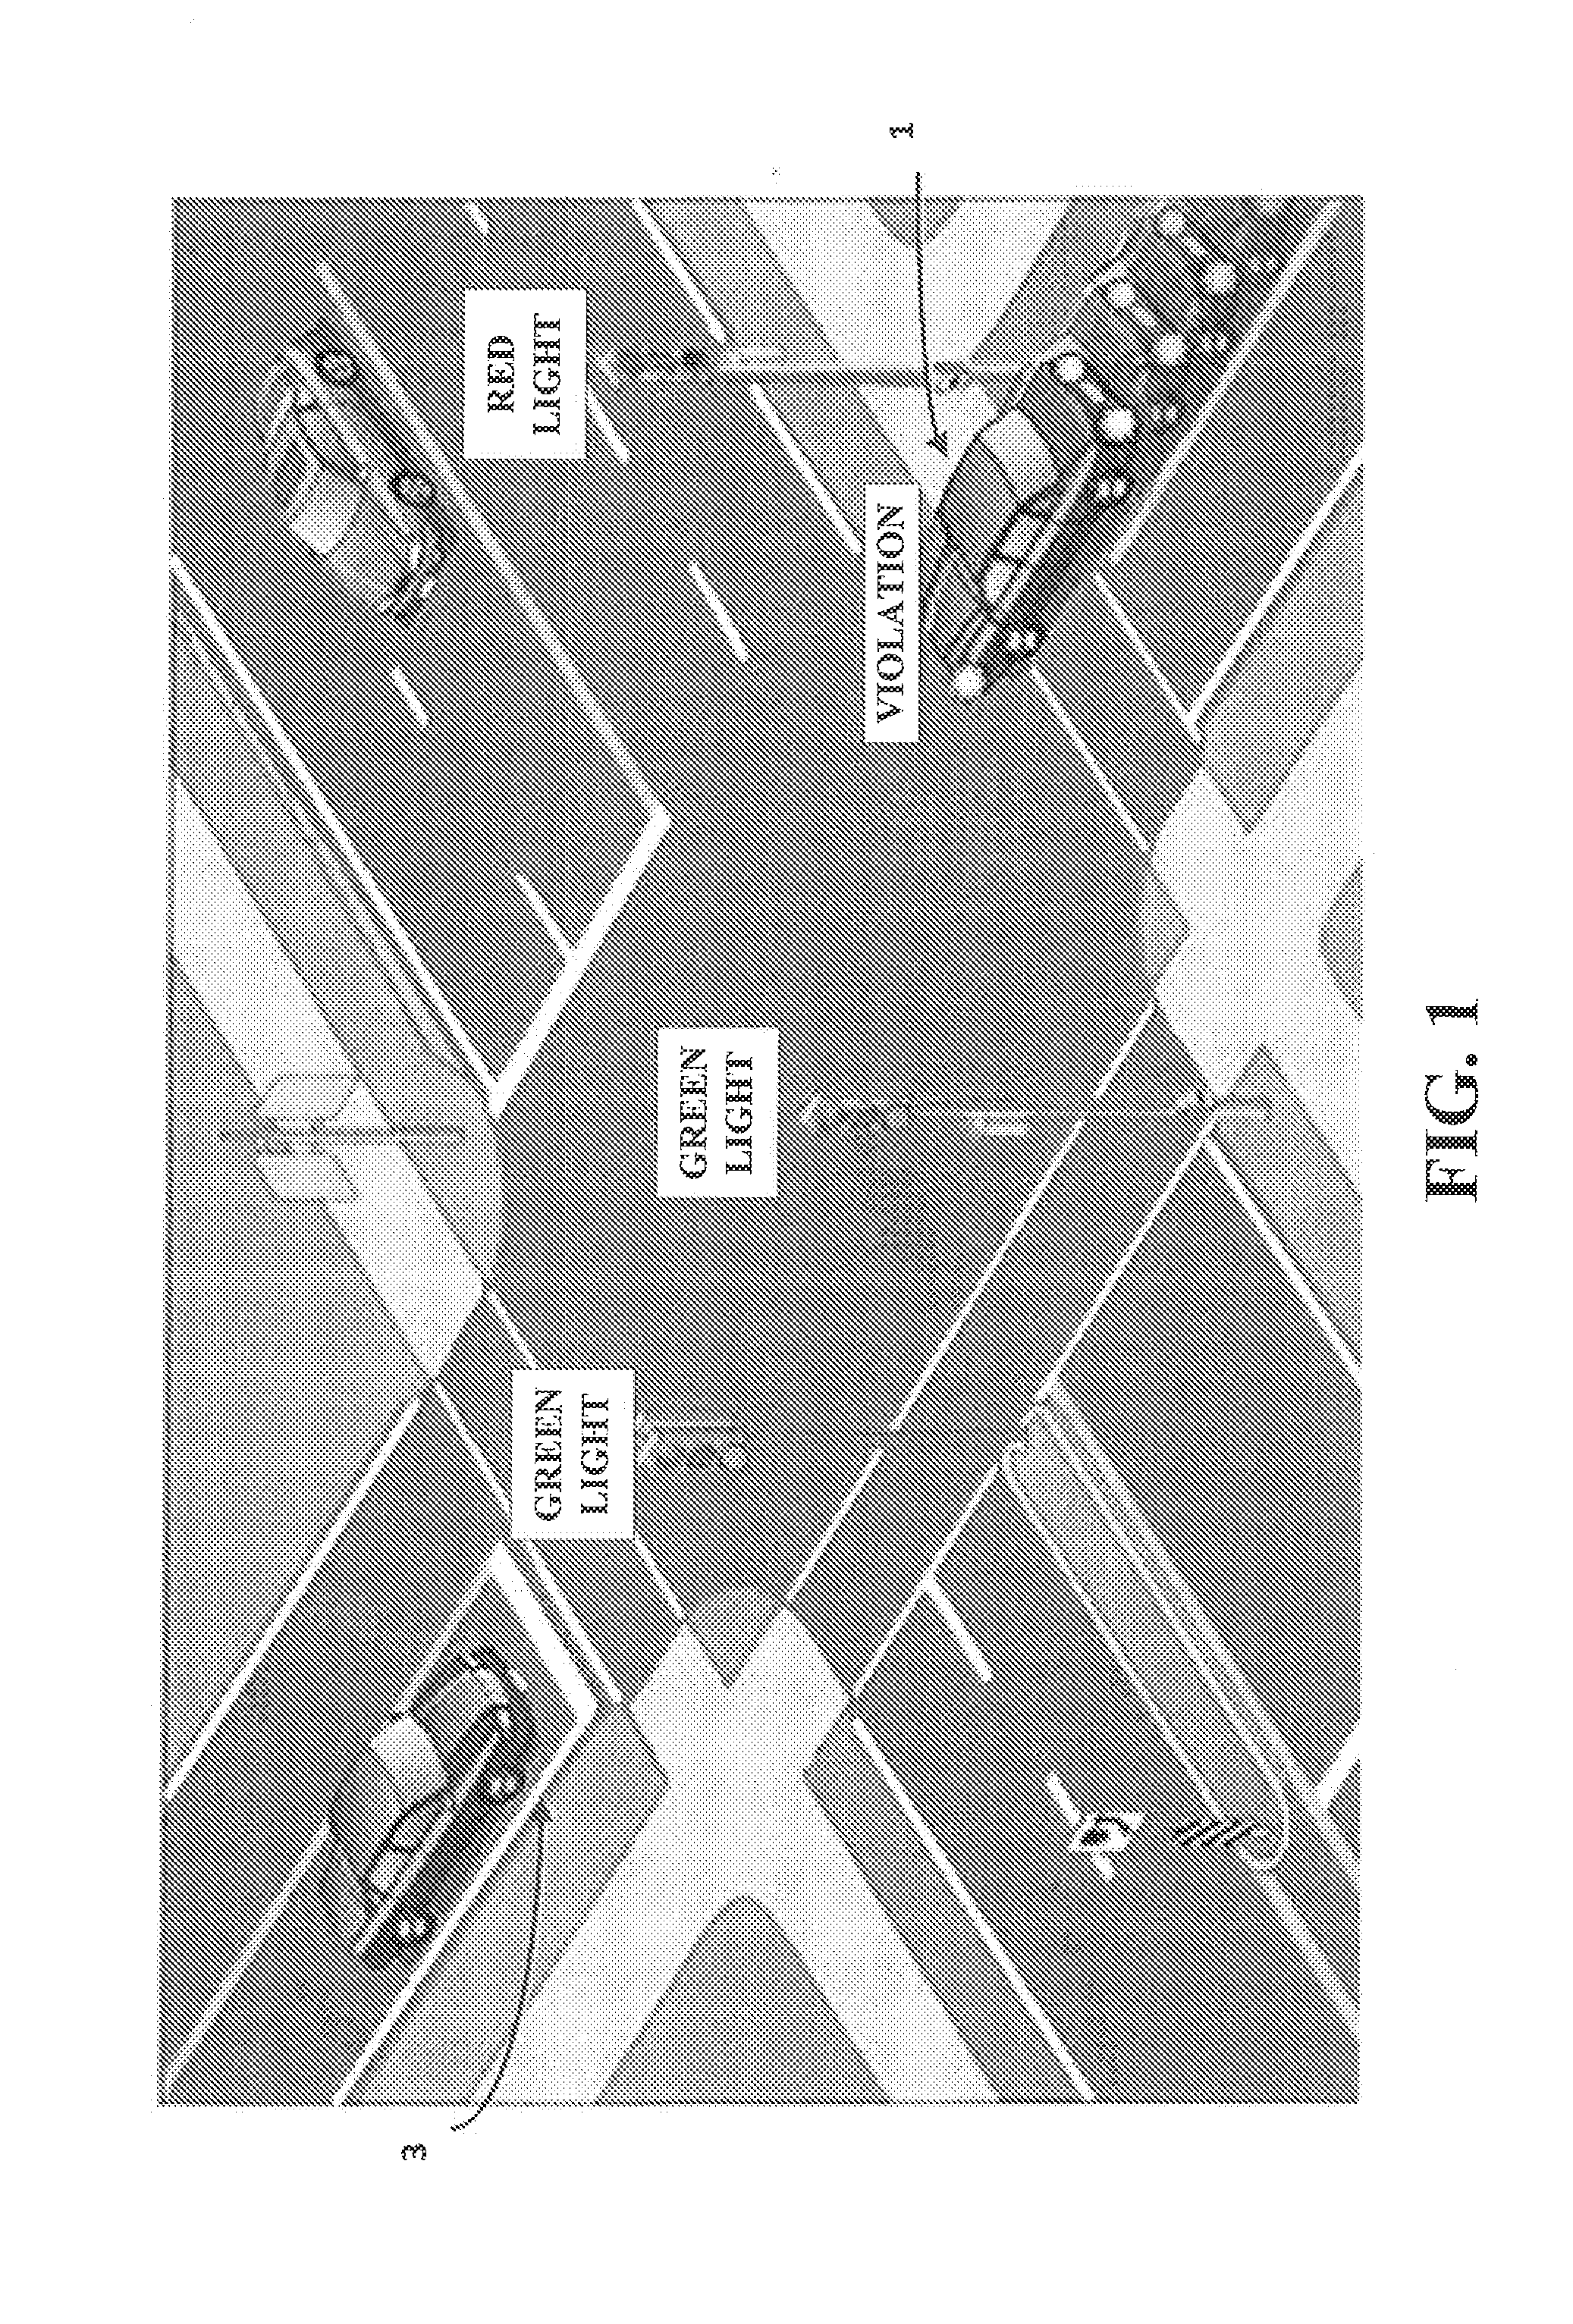 System and method for providing driver behavior classification at intersections and validation on large naturalistic data sets